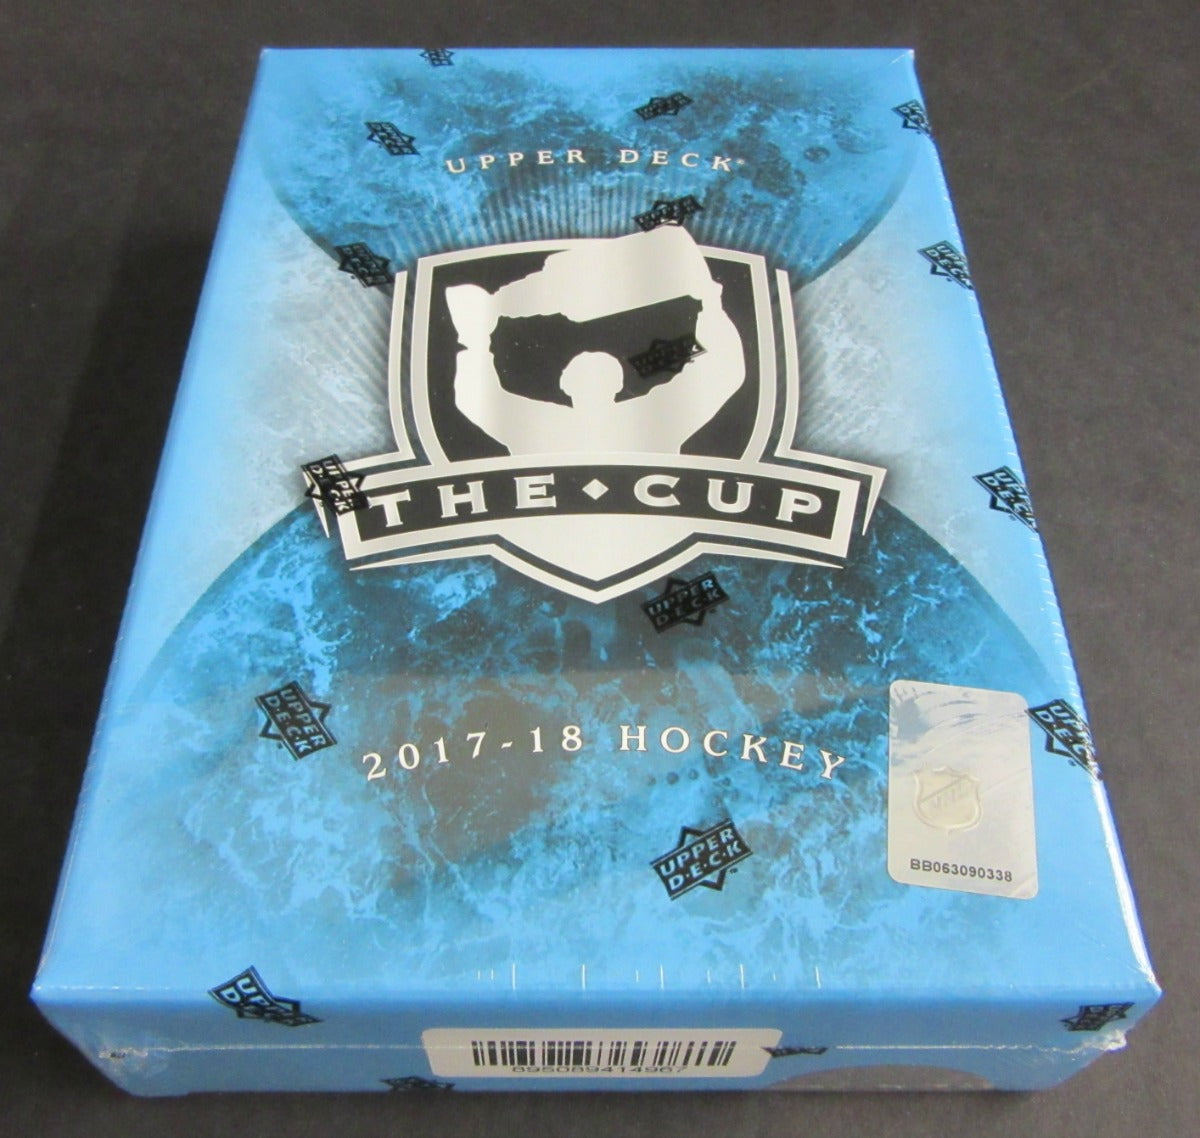 2017/18 Upper Deck The Cup Hockey Box (Hobby)